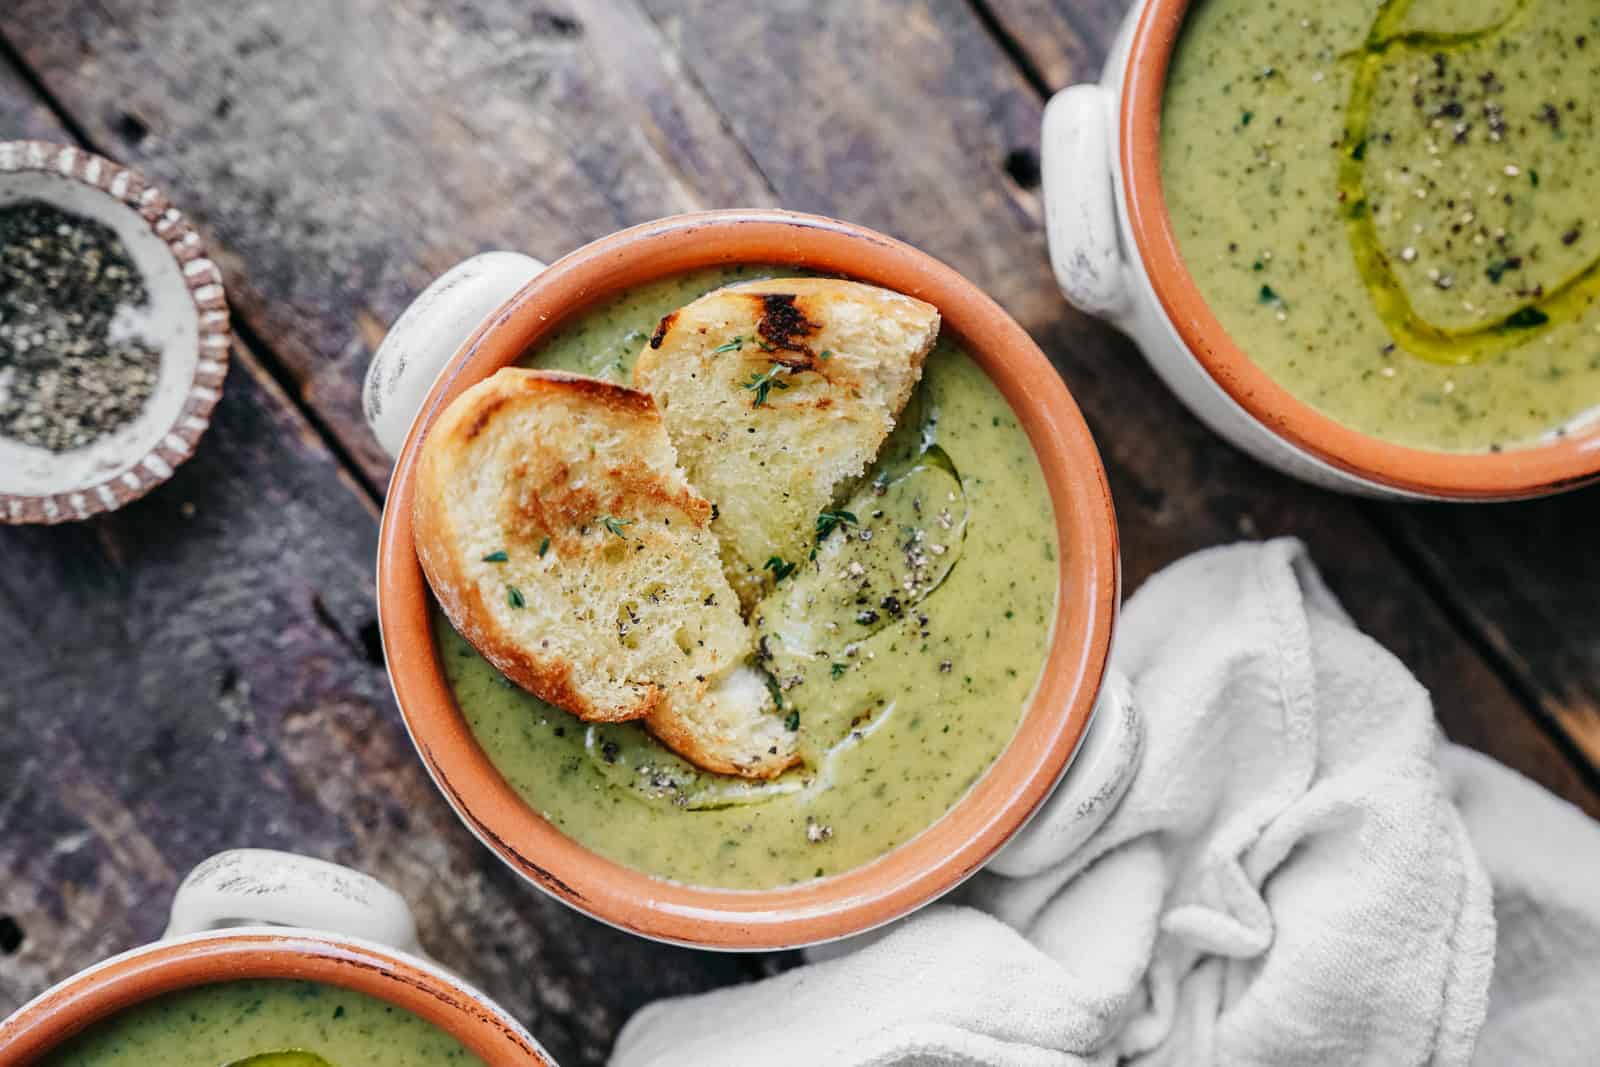 A comforting bowl of Broccoli Soup sitting on wooden table and topped with 2 slices of toasted bread.